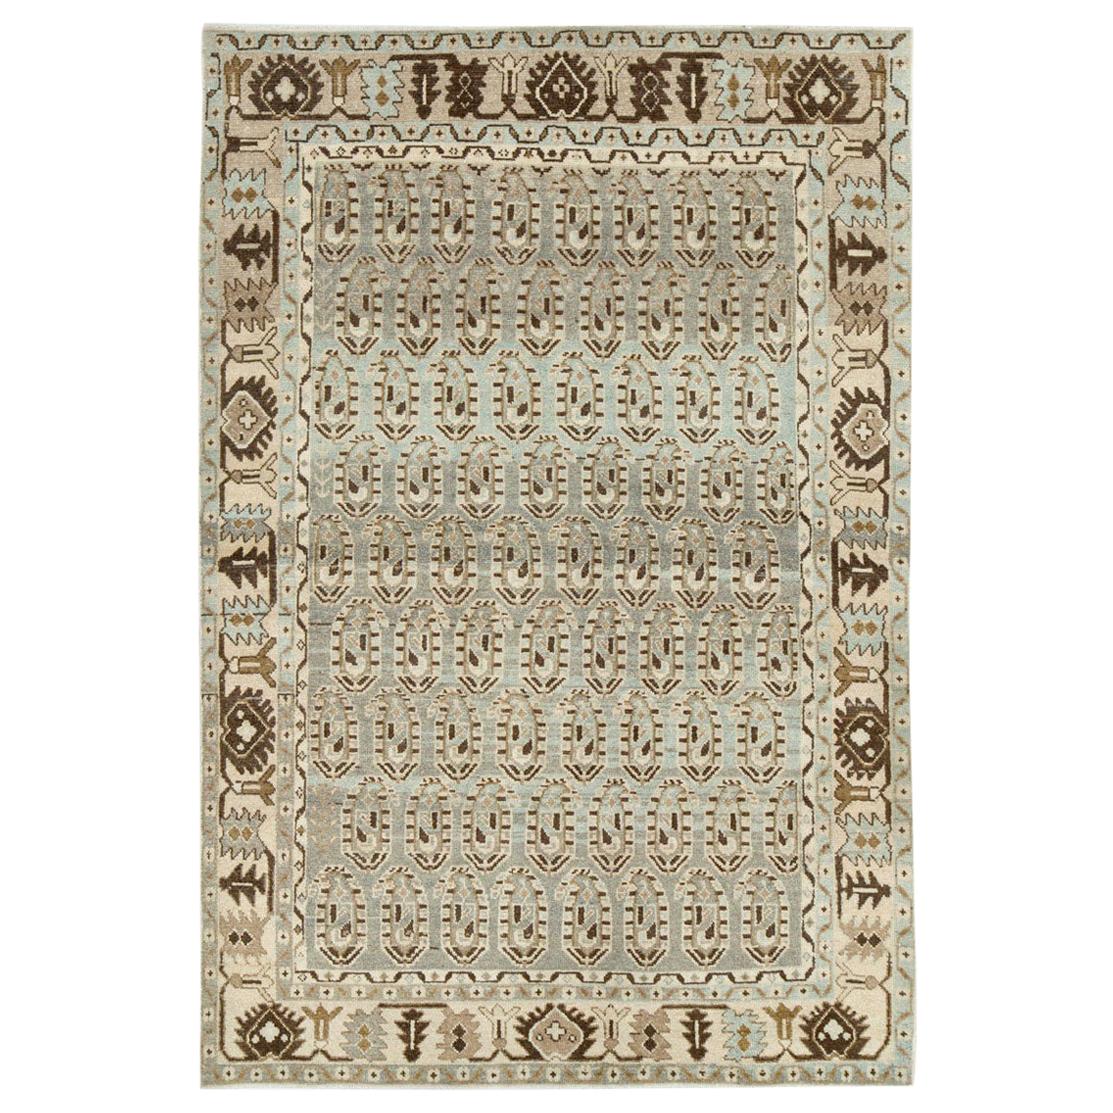 Midcentury Handmade Persian Accent Rug in Slate Blue, Beige, and Brown